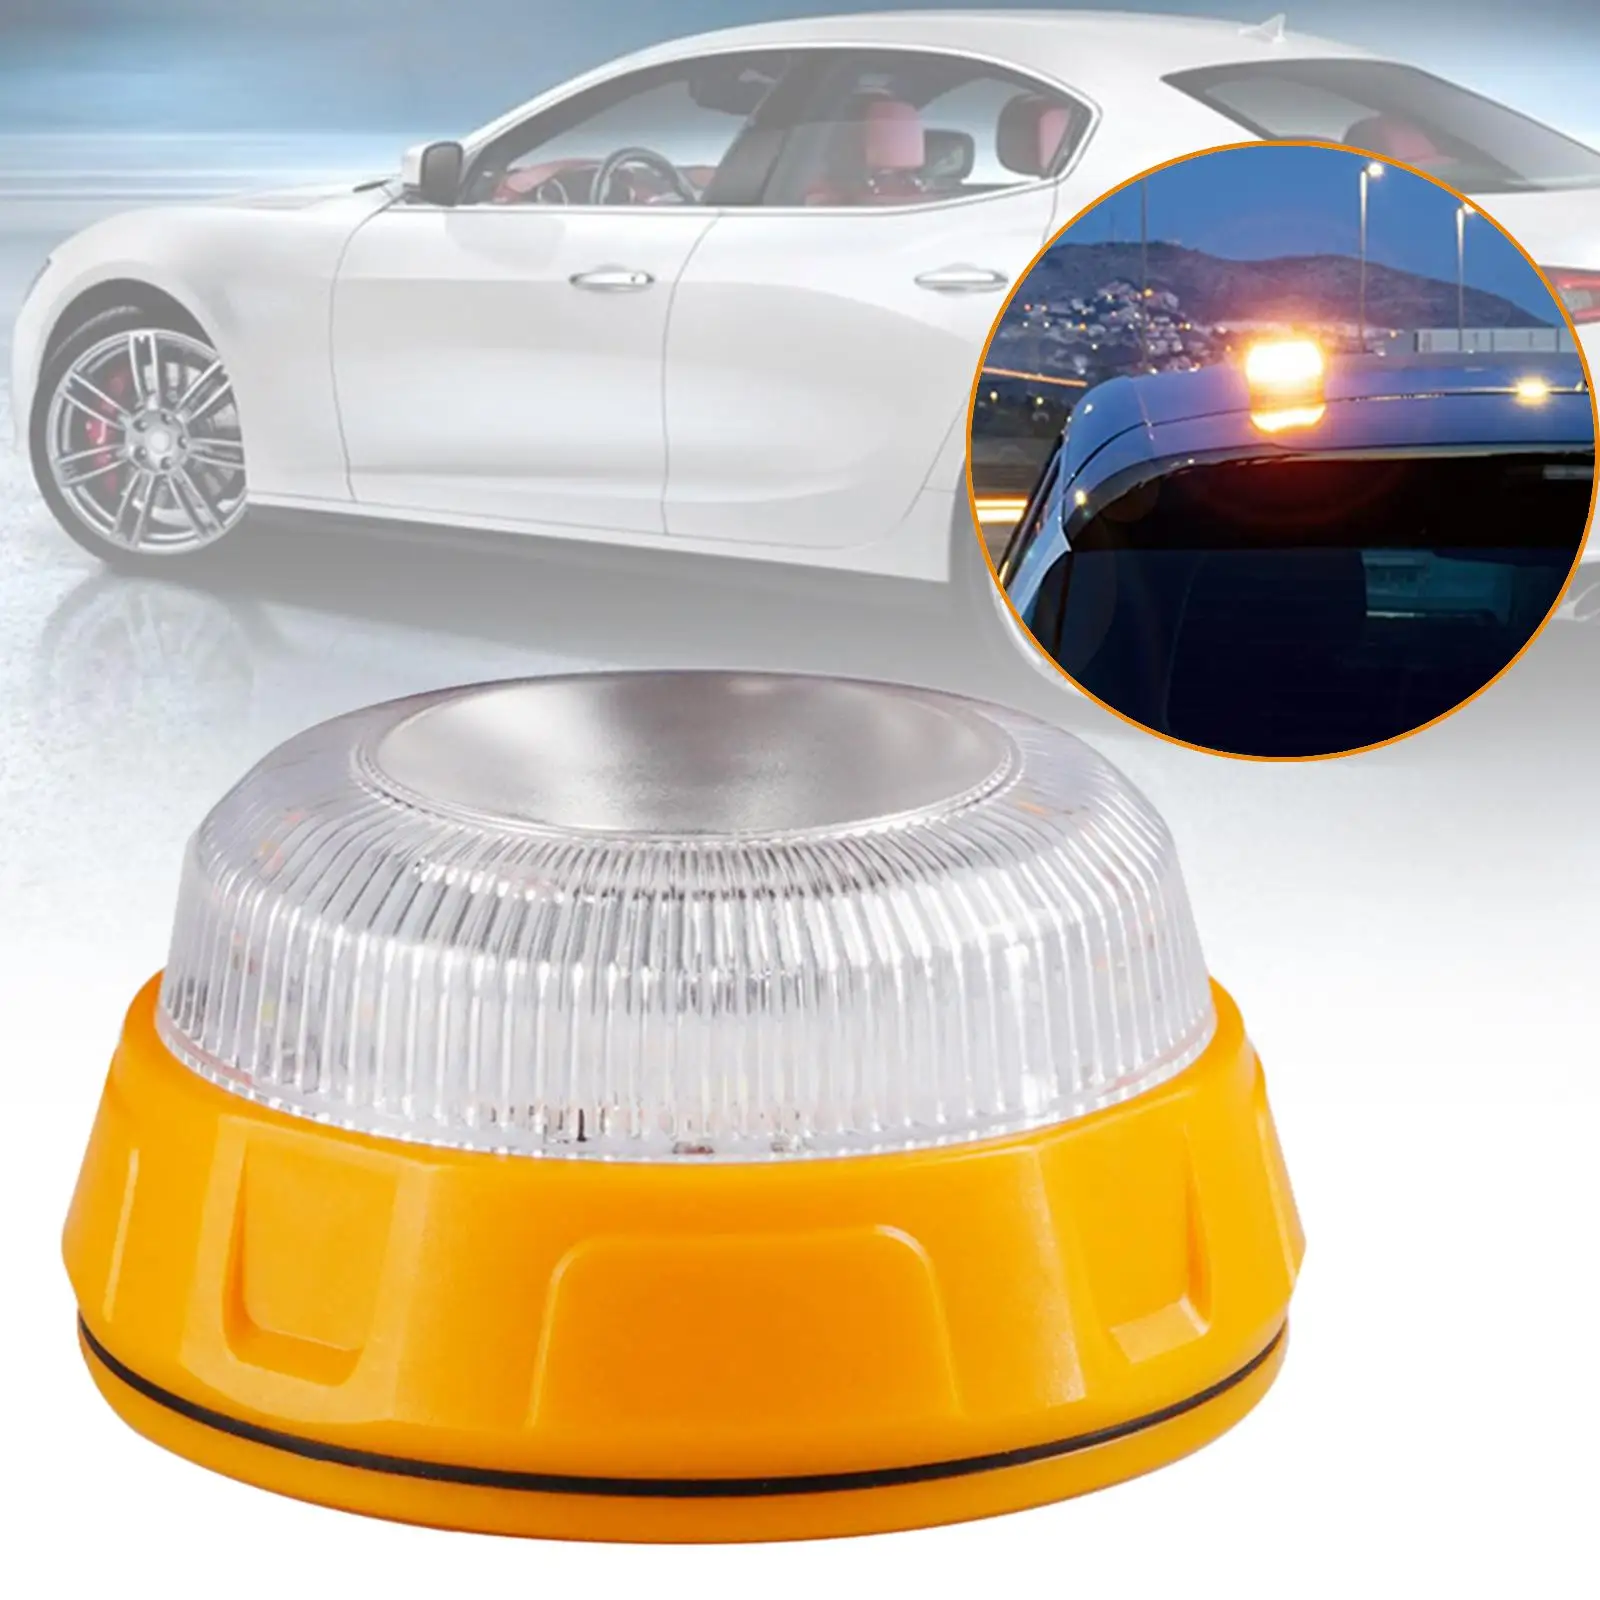 Traffic Warning Lights Waterproof Rechargeable Lights with Magnetic Base Flashing Lamp Emergency Lighting for Marine Car